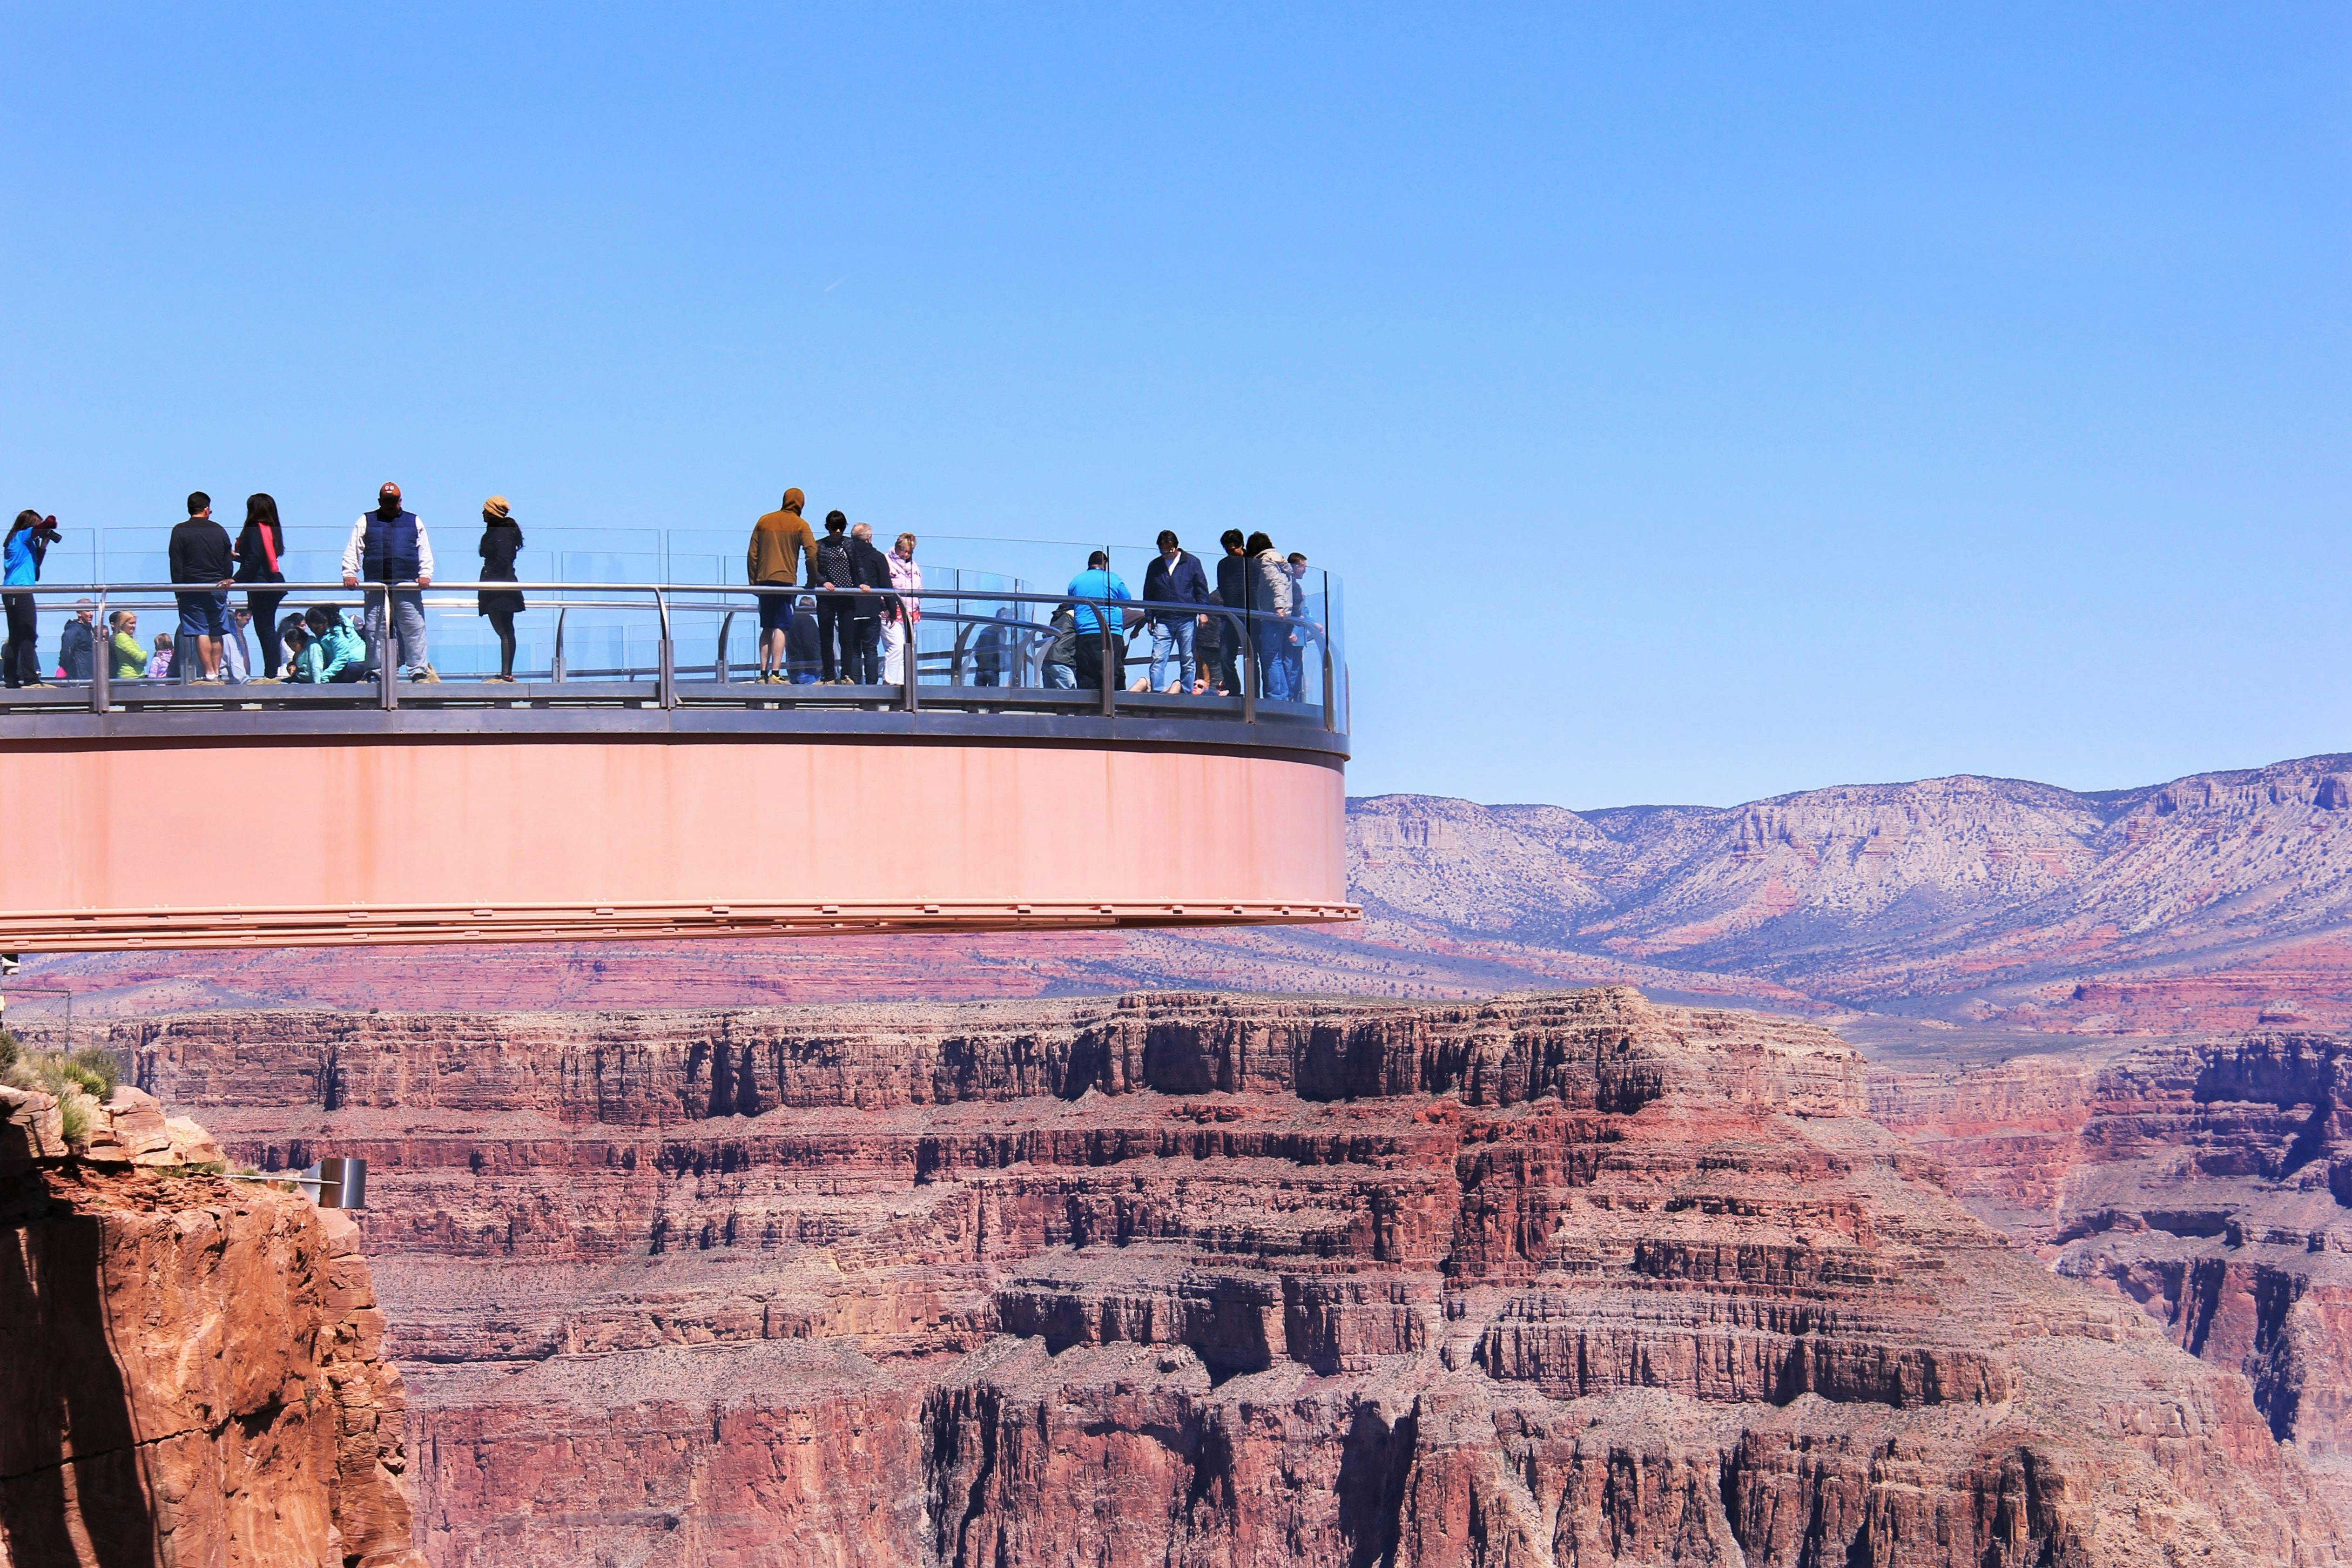 Grand Canyon West Rim Day Tour with Skywalk Admission from Las Vegas